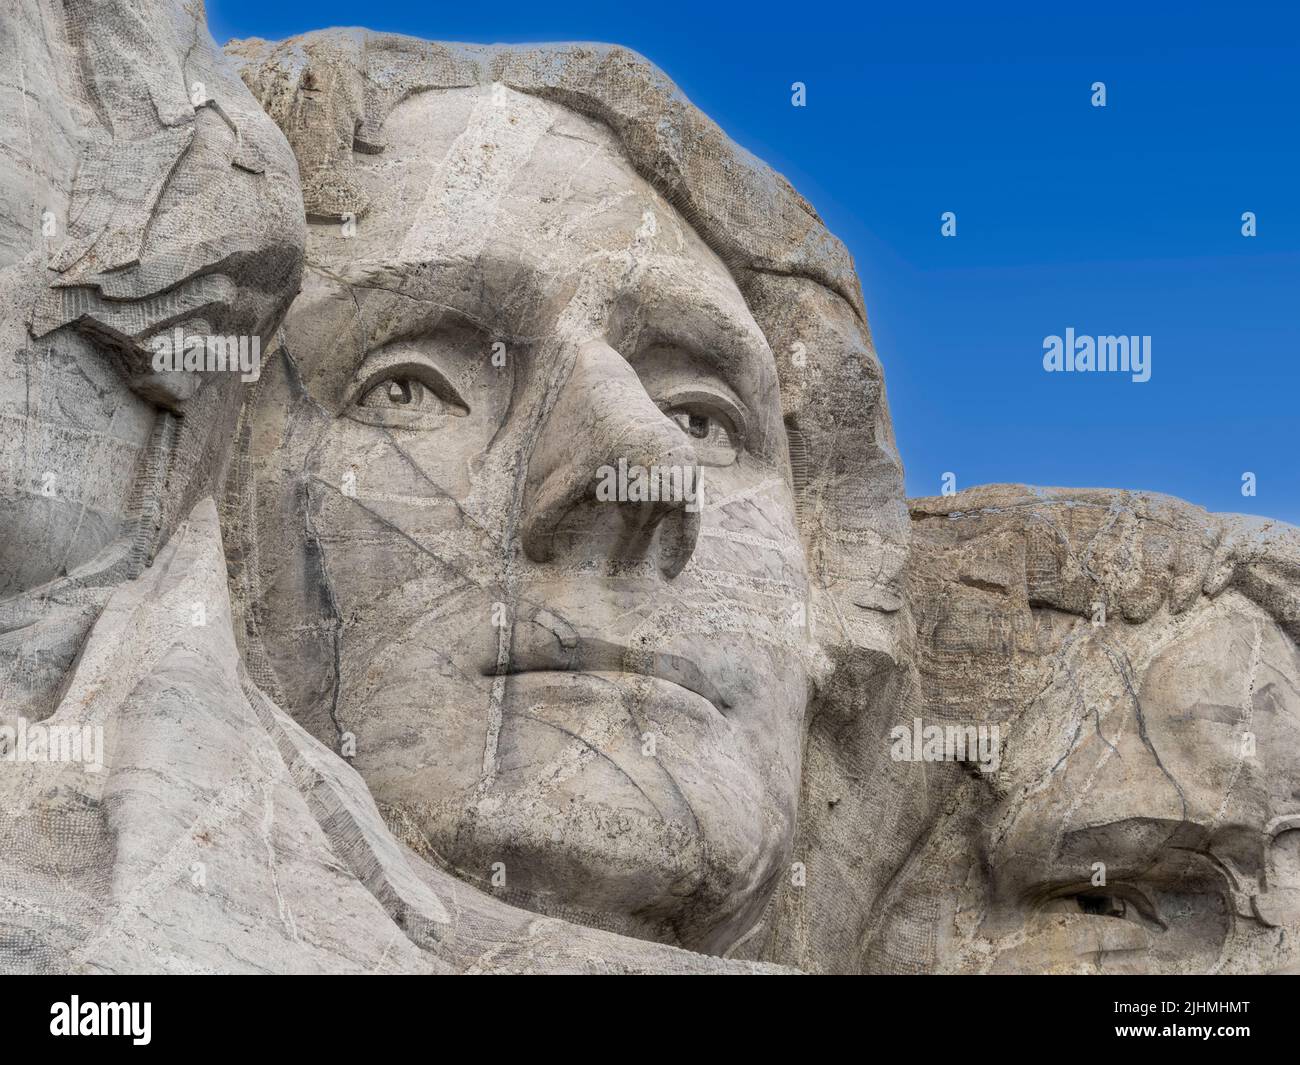 Close-up of Thomas Jefferson sculpture at Mount Rushmore National Memorial in the Black Hills of South Dakota USA Stock Photo